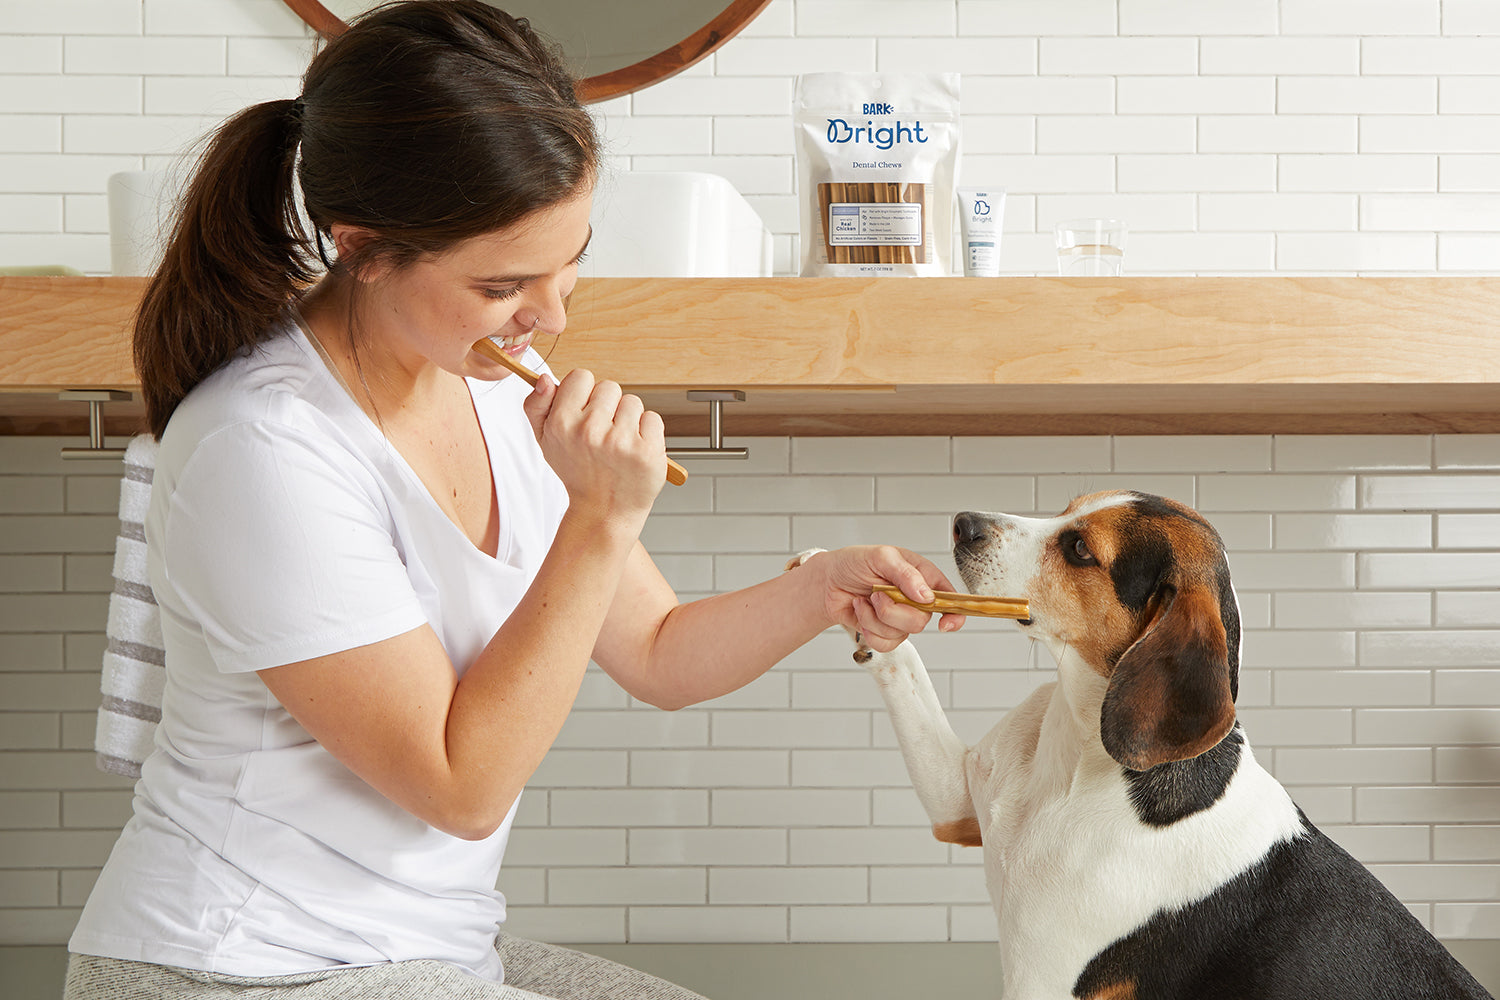 New Study: Nearly 70% of Dog Parents Have Never Brushed Their Dogs' Teeth